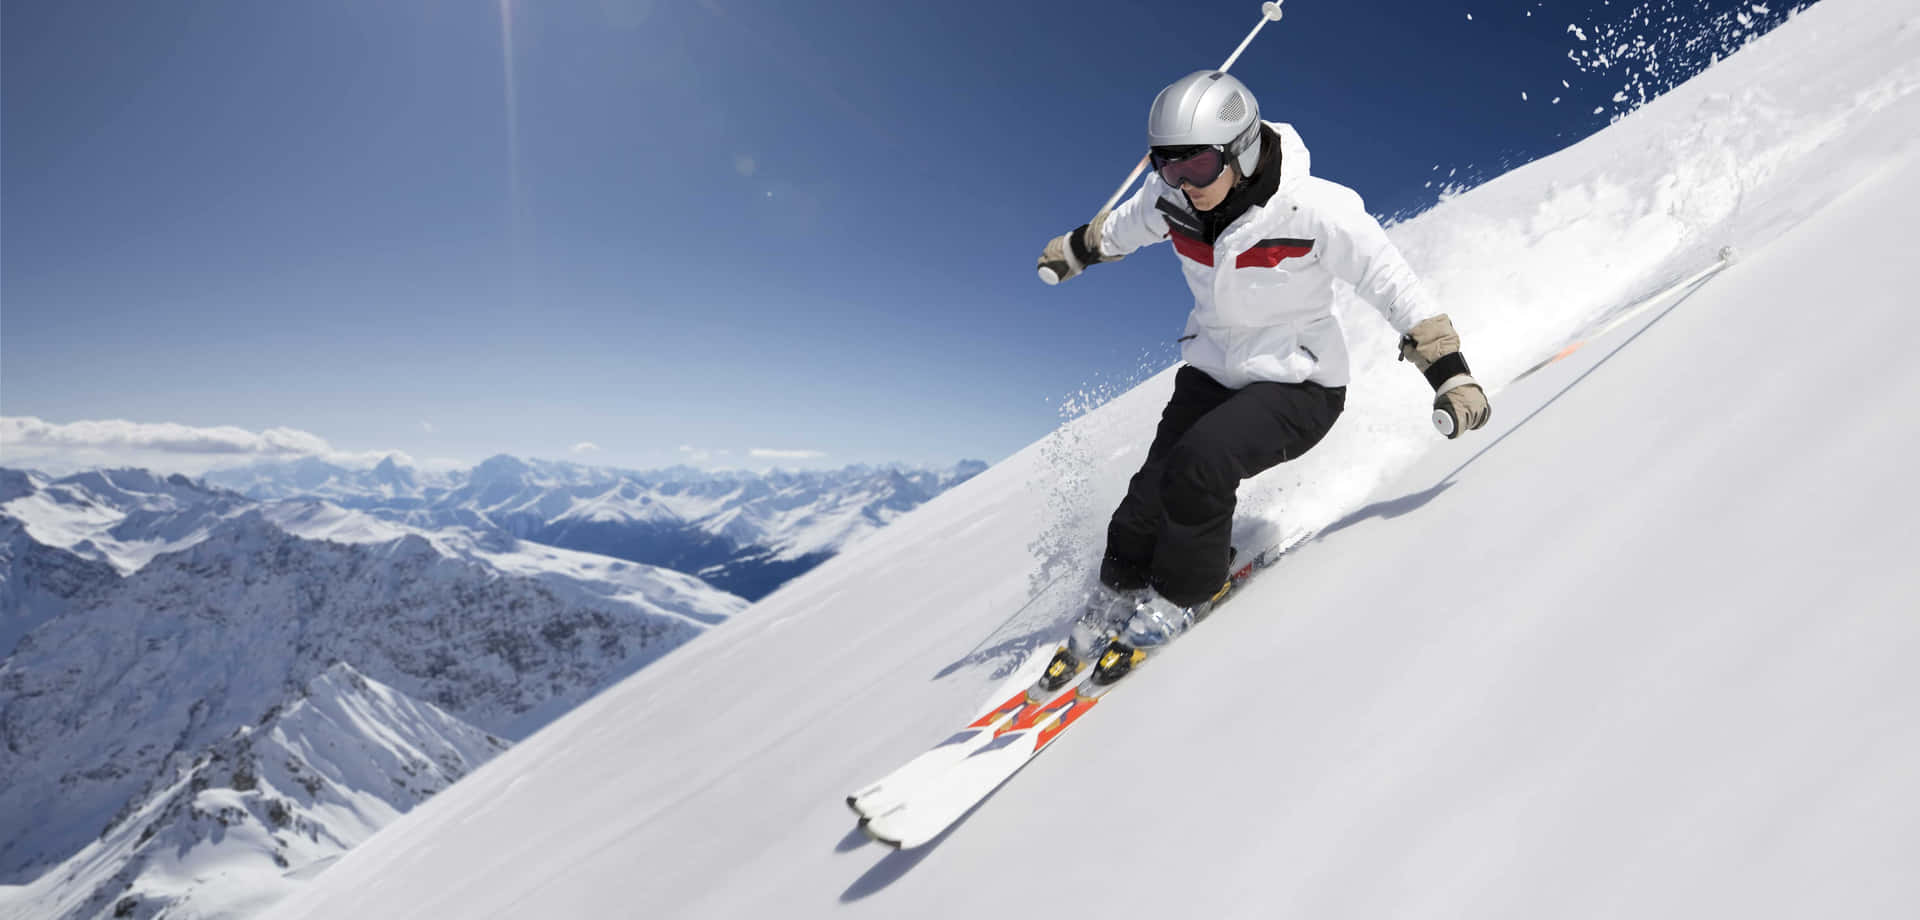 Enjoy the thrill of skiing in the snow-capped mountains Wallpaper